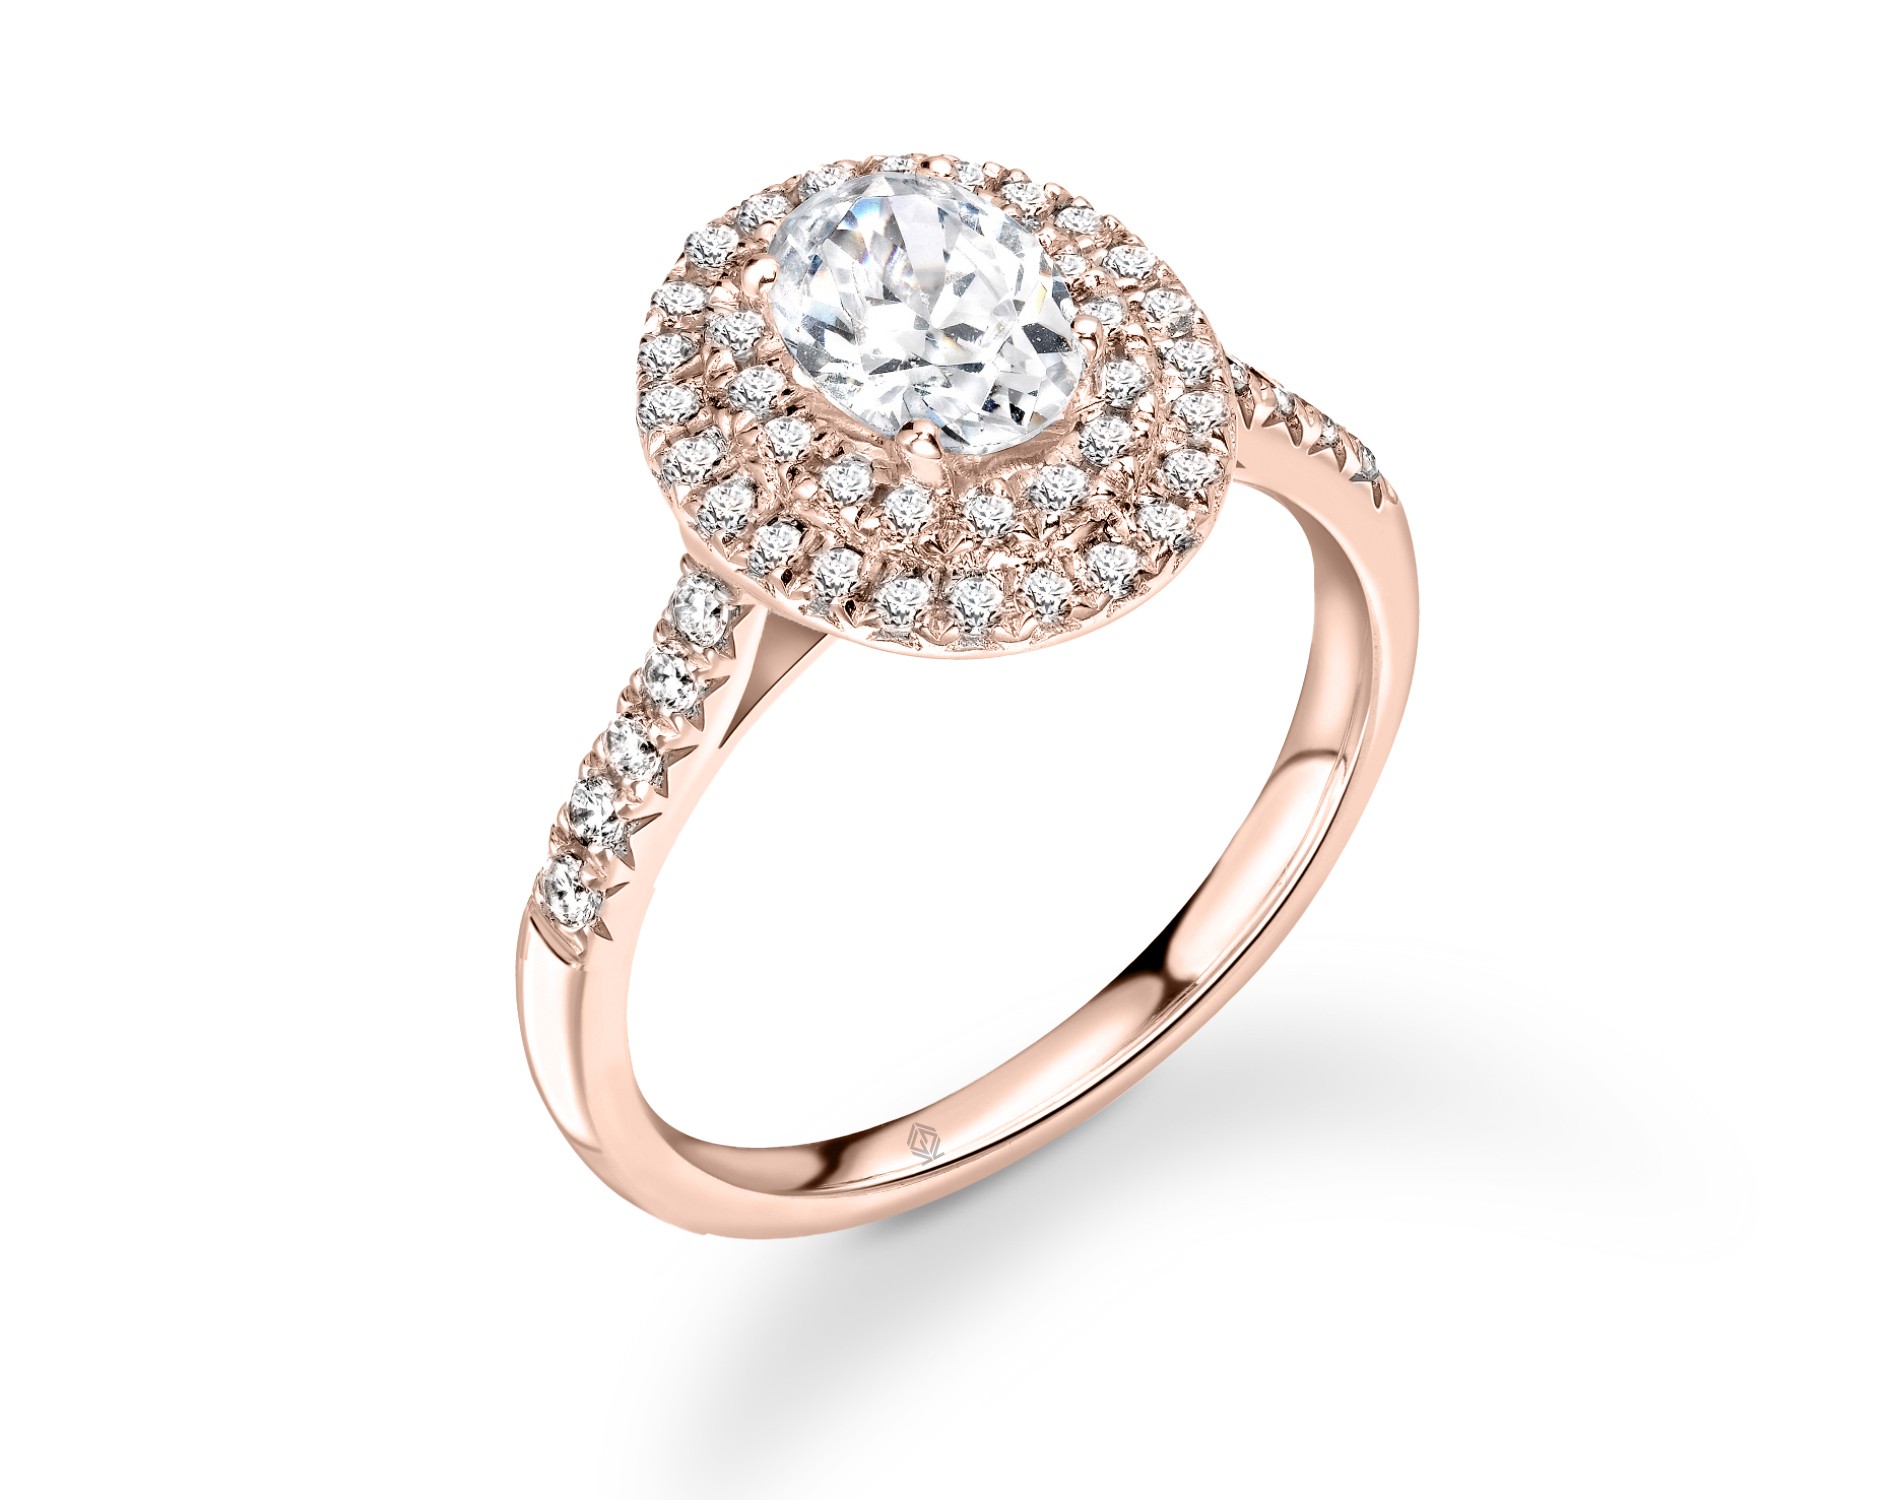 18K ROSE GOLD DOUBLE HALO OVAL CUT DIAMOND ENGAGEMENT RING WITH SIDE STONES PAVE SET